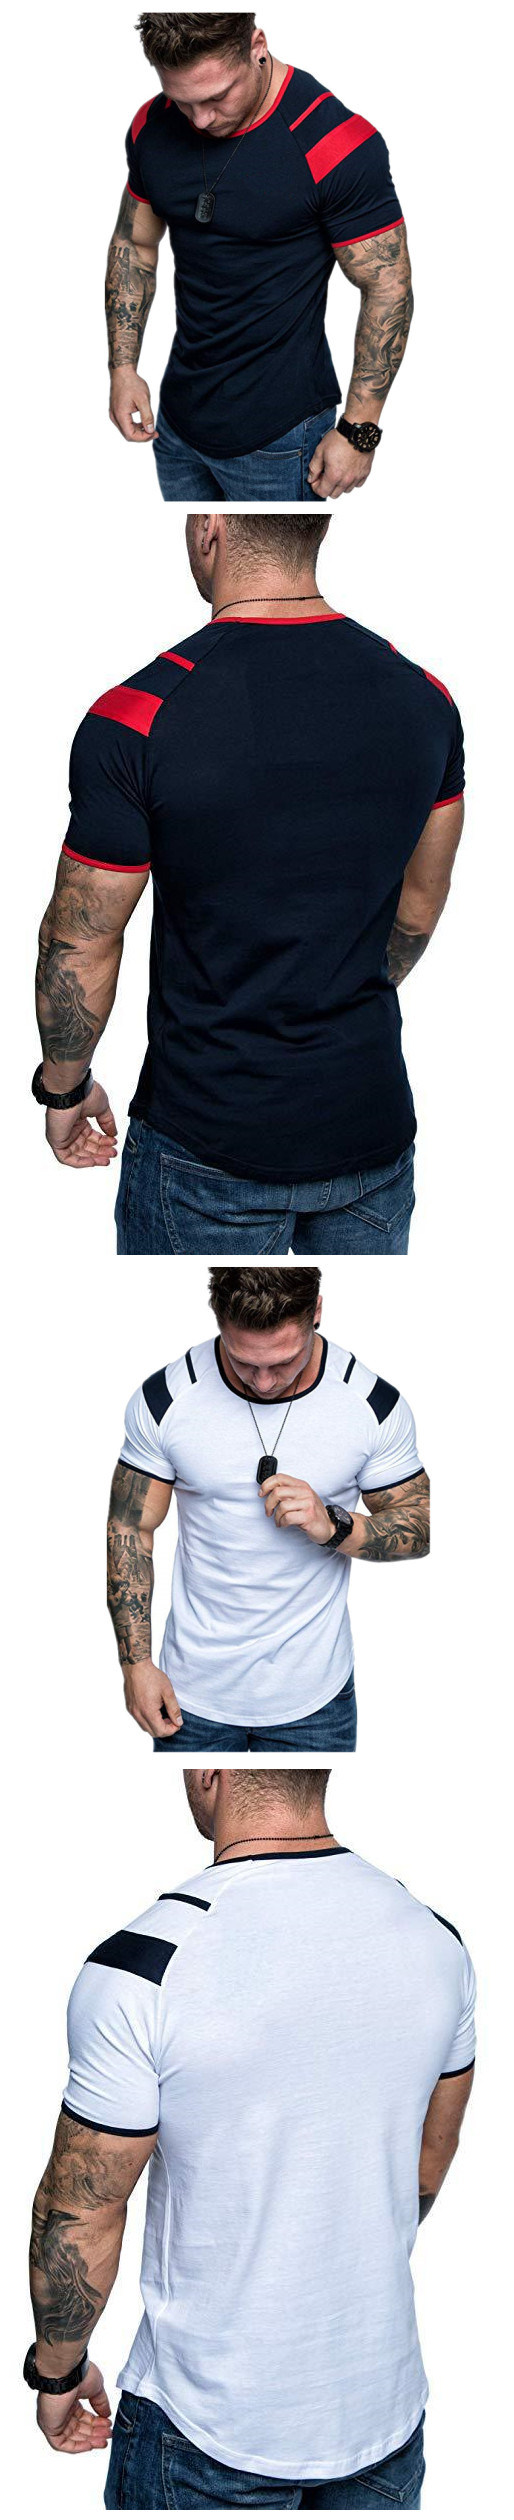 Factory Men T-Shirt Double Color Sports Tshirt Casual Sport Short Sleeves T-Shirts